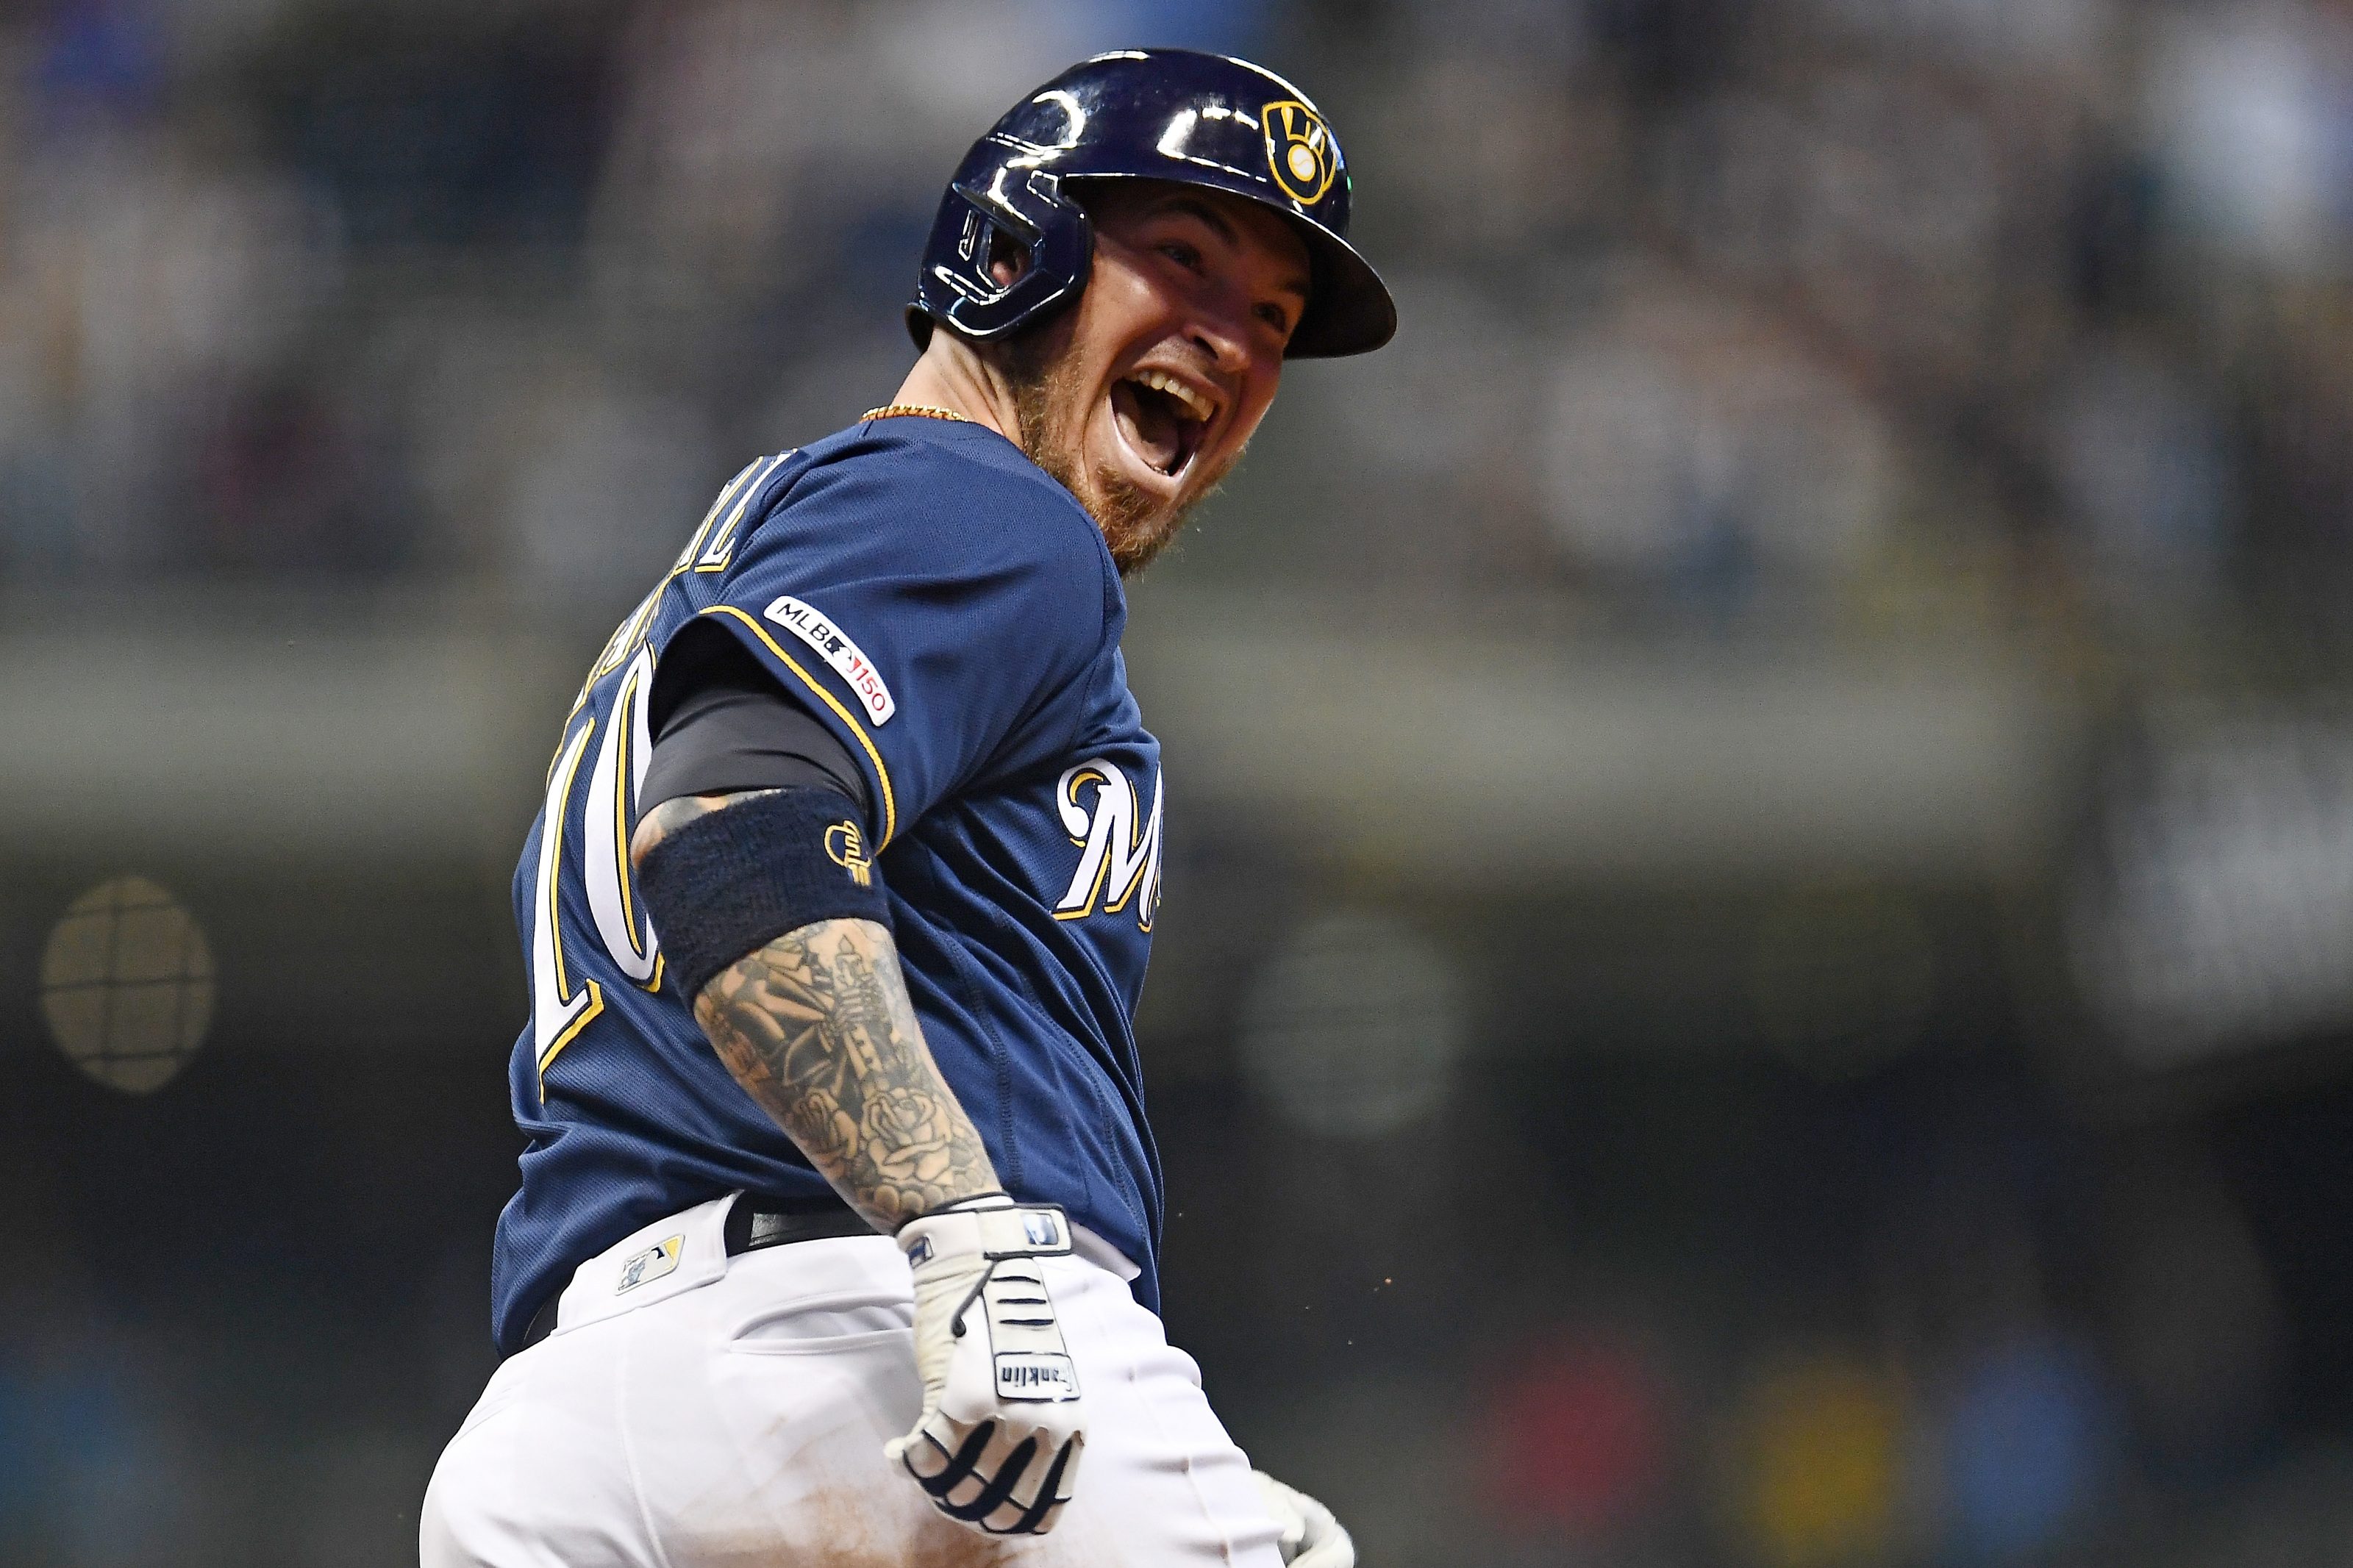 Yasmani Grandal chose Brewers for family and chance to win